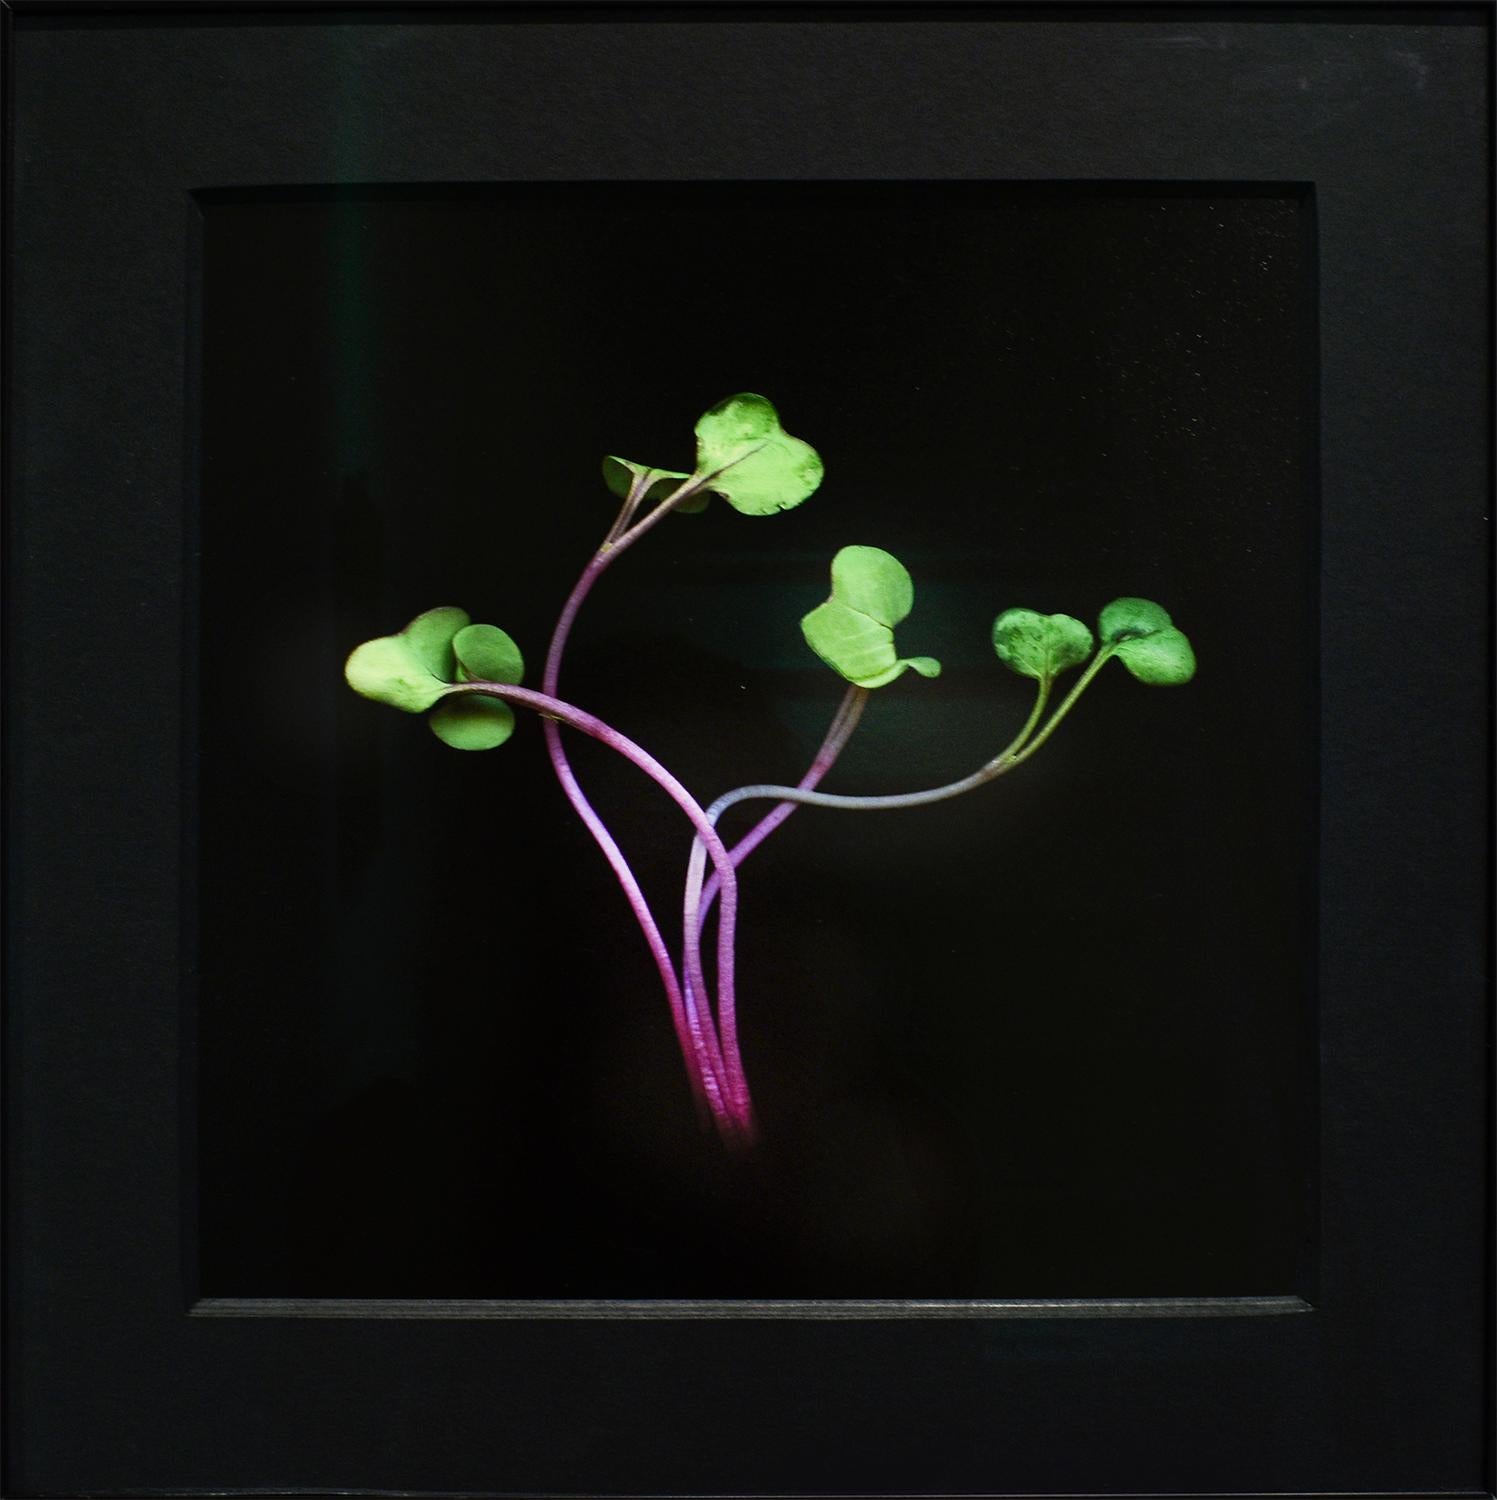 Radish Sprouts (Framed Green Vegetable Still Life Photograph on Black)  For Sale 1